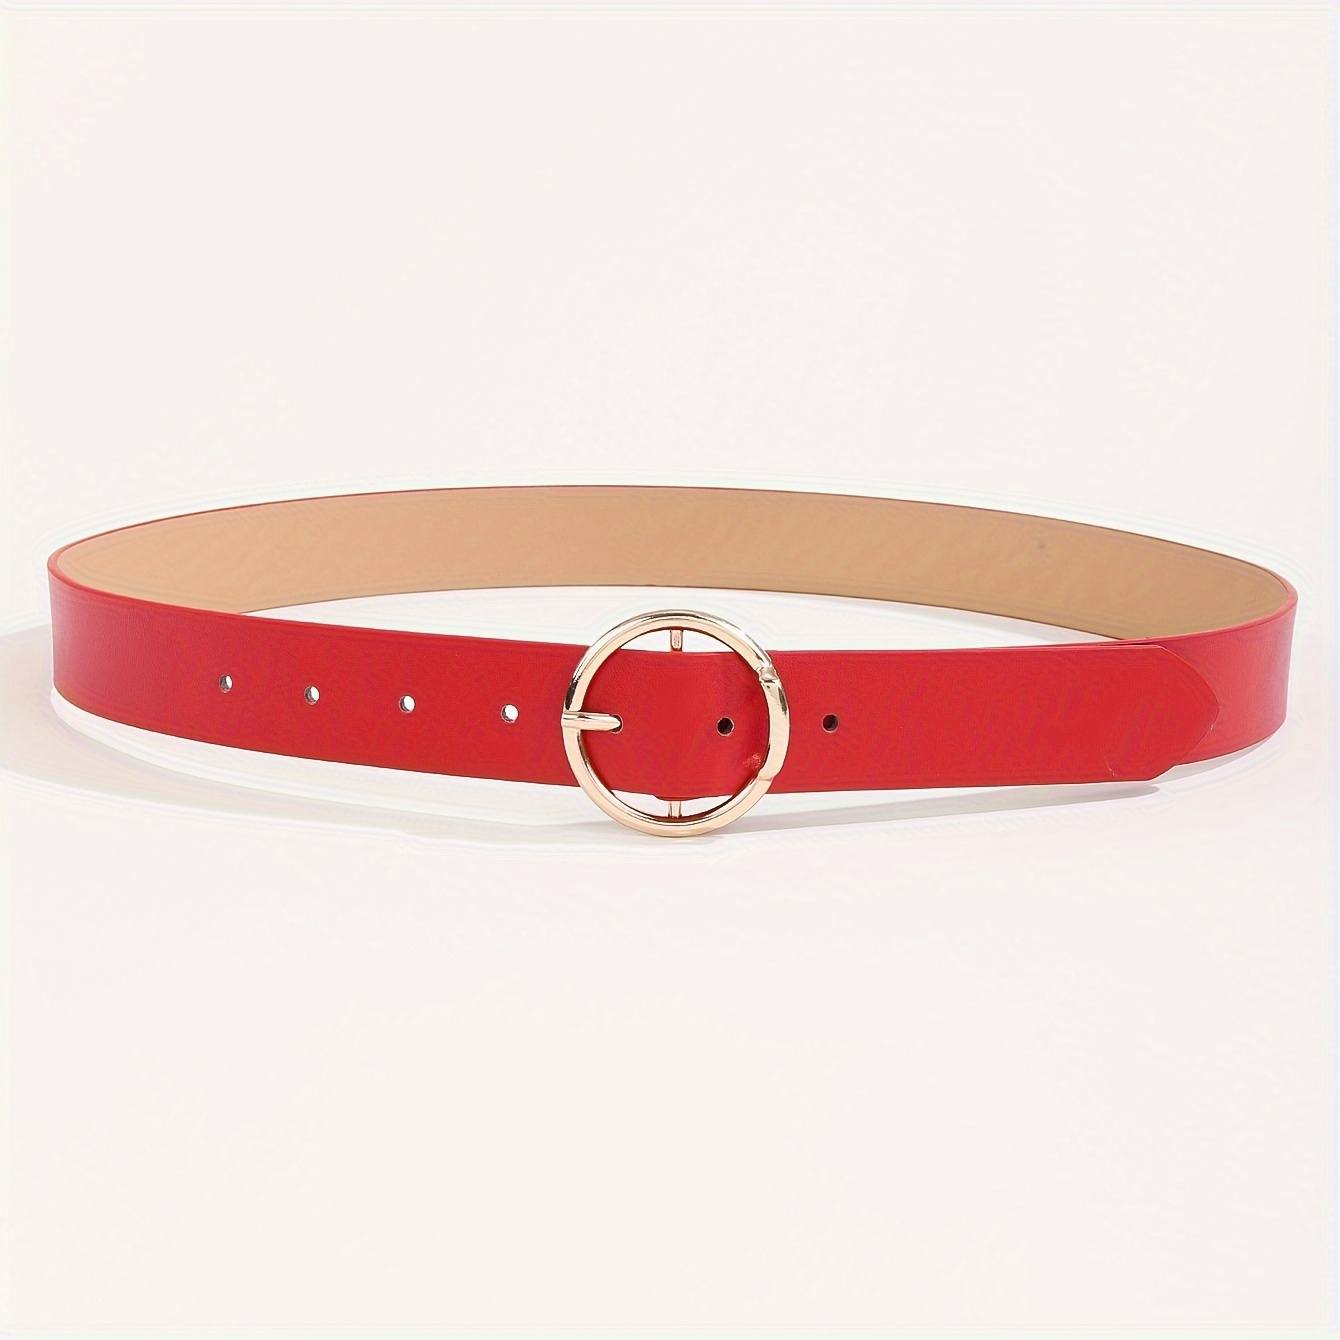 

Women's Fashion Belt Red With Gold-tone Circular Buckle, Casual And Business Style Adjustable Fit